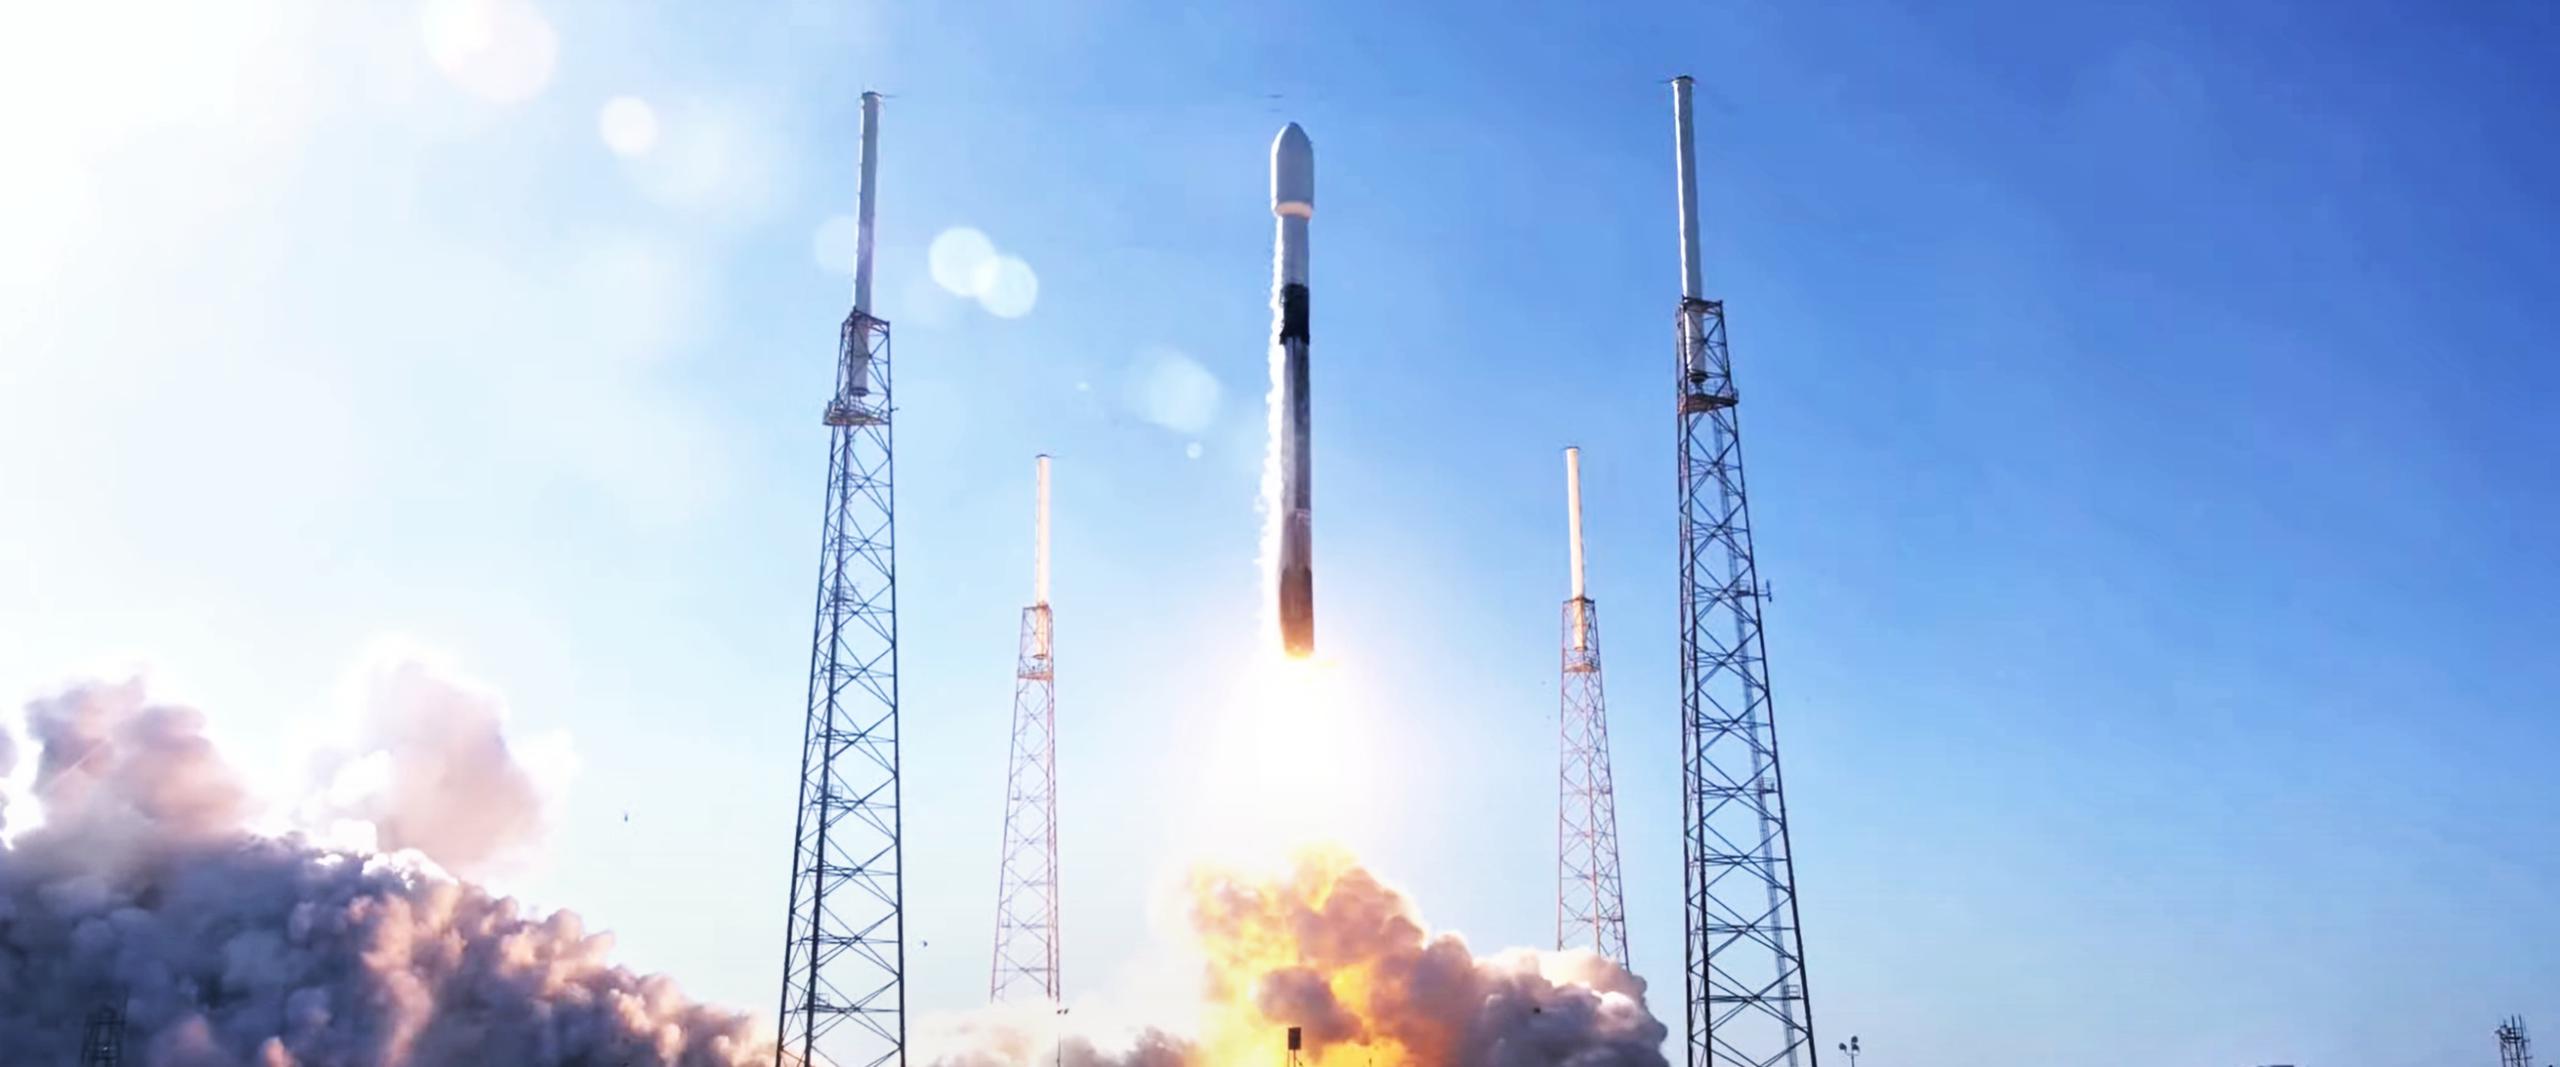 Transporter-3 F9 B1058 LC-40 webcast 011322 (SpaceX) liftoff 2 crop 2 (c)